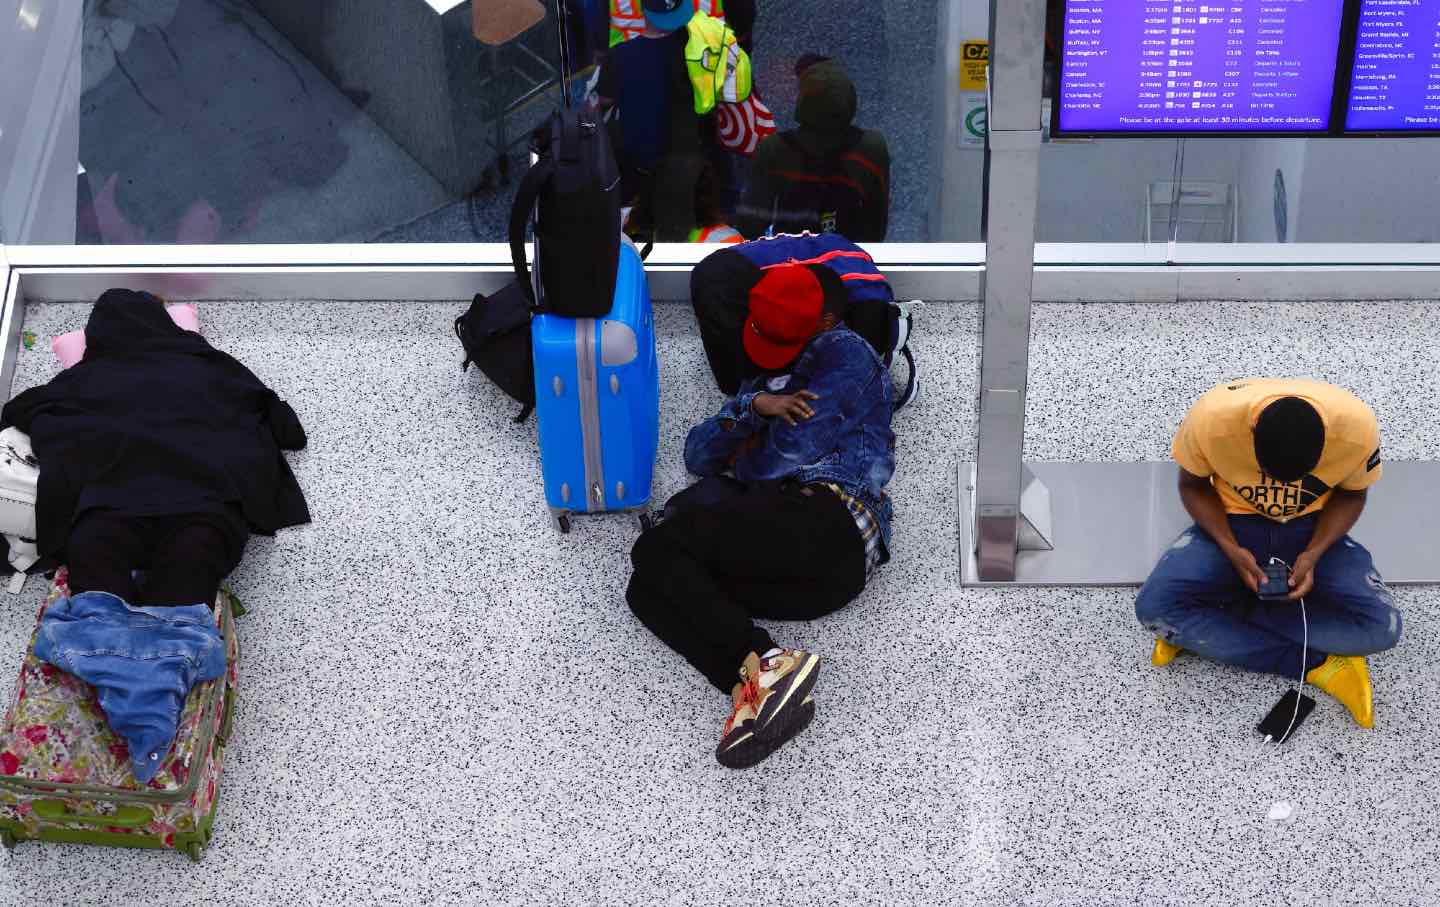 People sit, lay on the ground at the airport with suitcases as they wait for their flights to be rescheduled